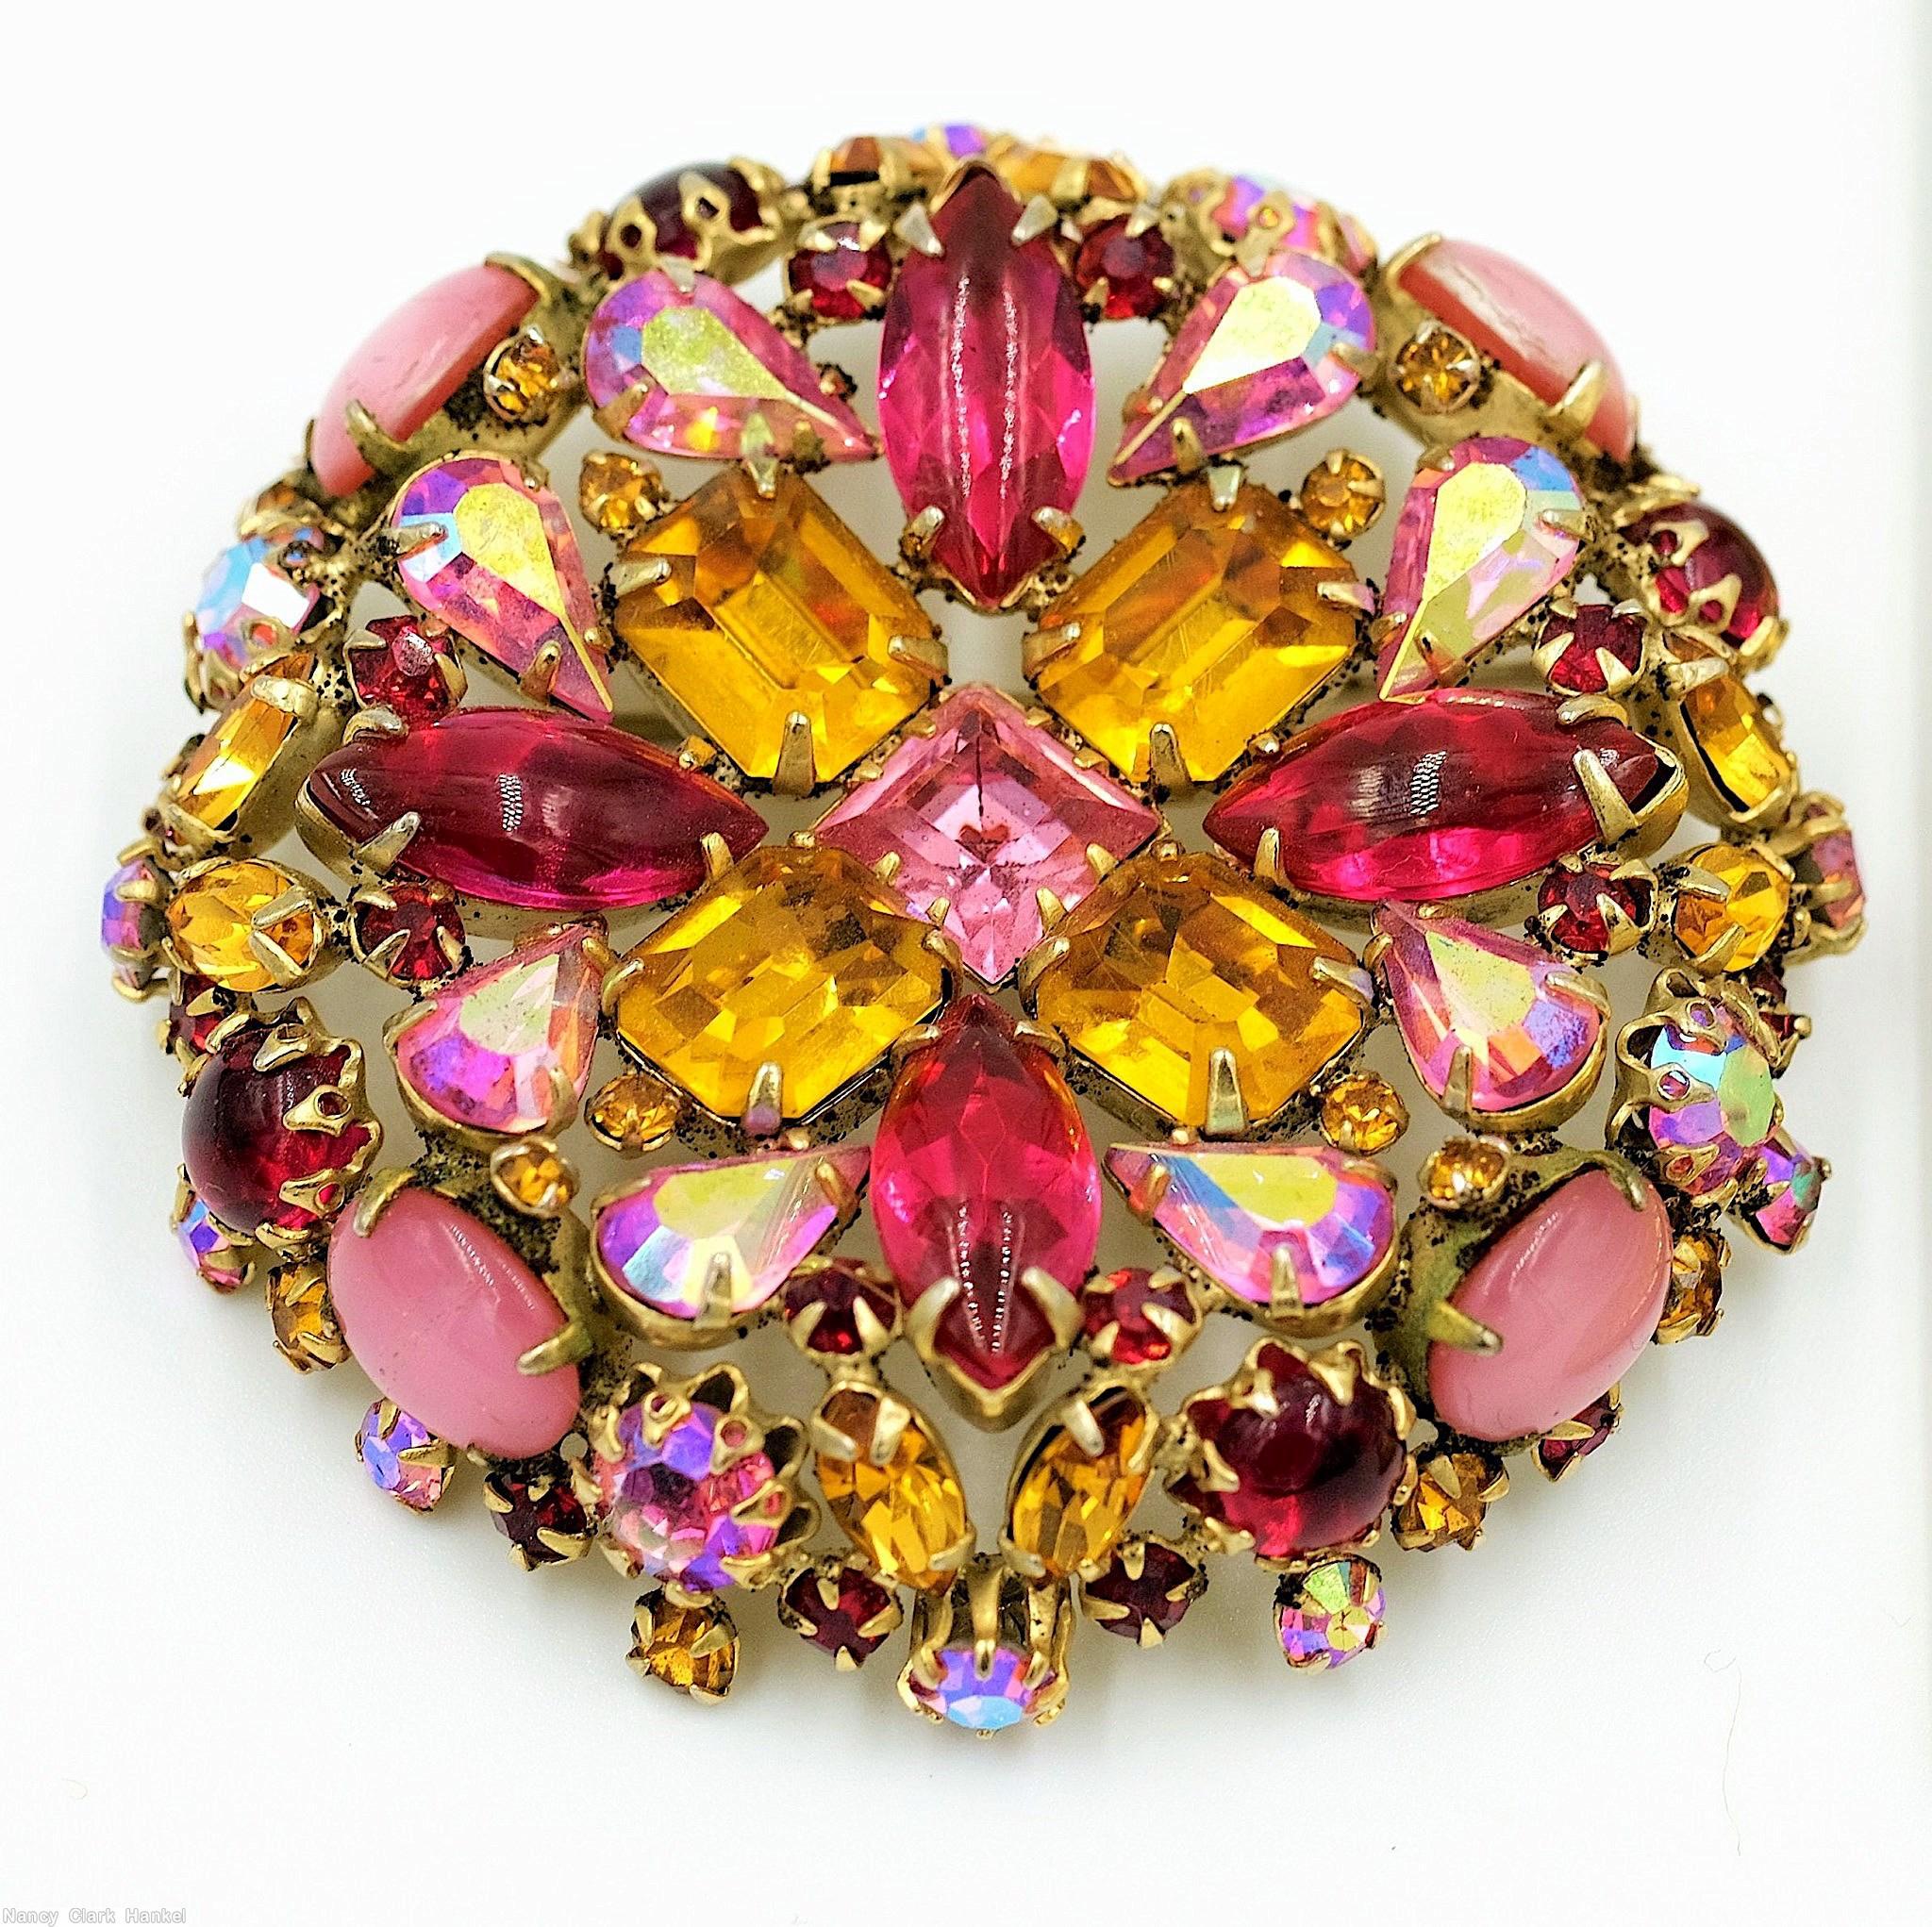 Schreiner hexagonal domed radial concave flat top pin small chaton center 6 surrounding navette 6 round stone on side wall amber emerald cut fuschia navette ab faceted teardrop moonglow opaque pink ruby chaton goldtone jewelry